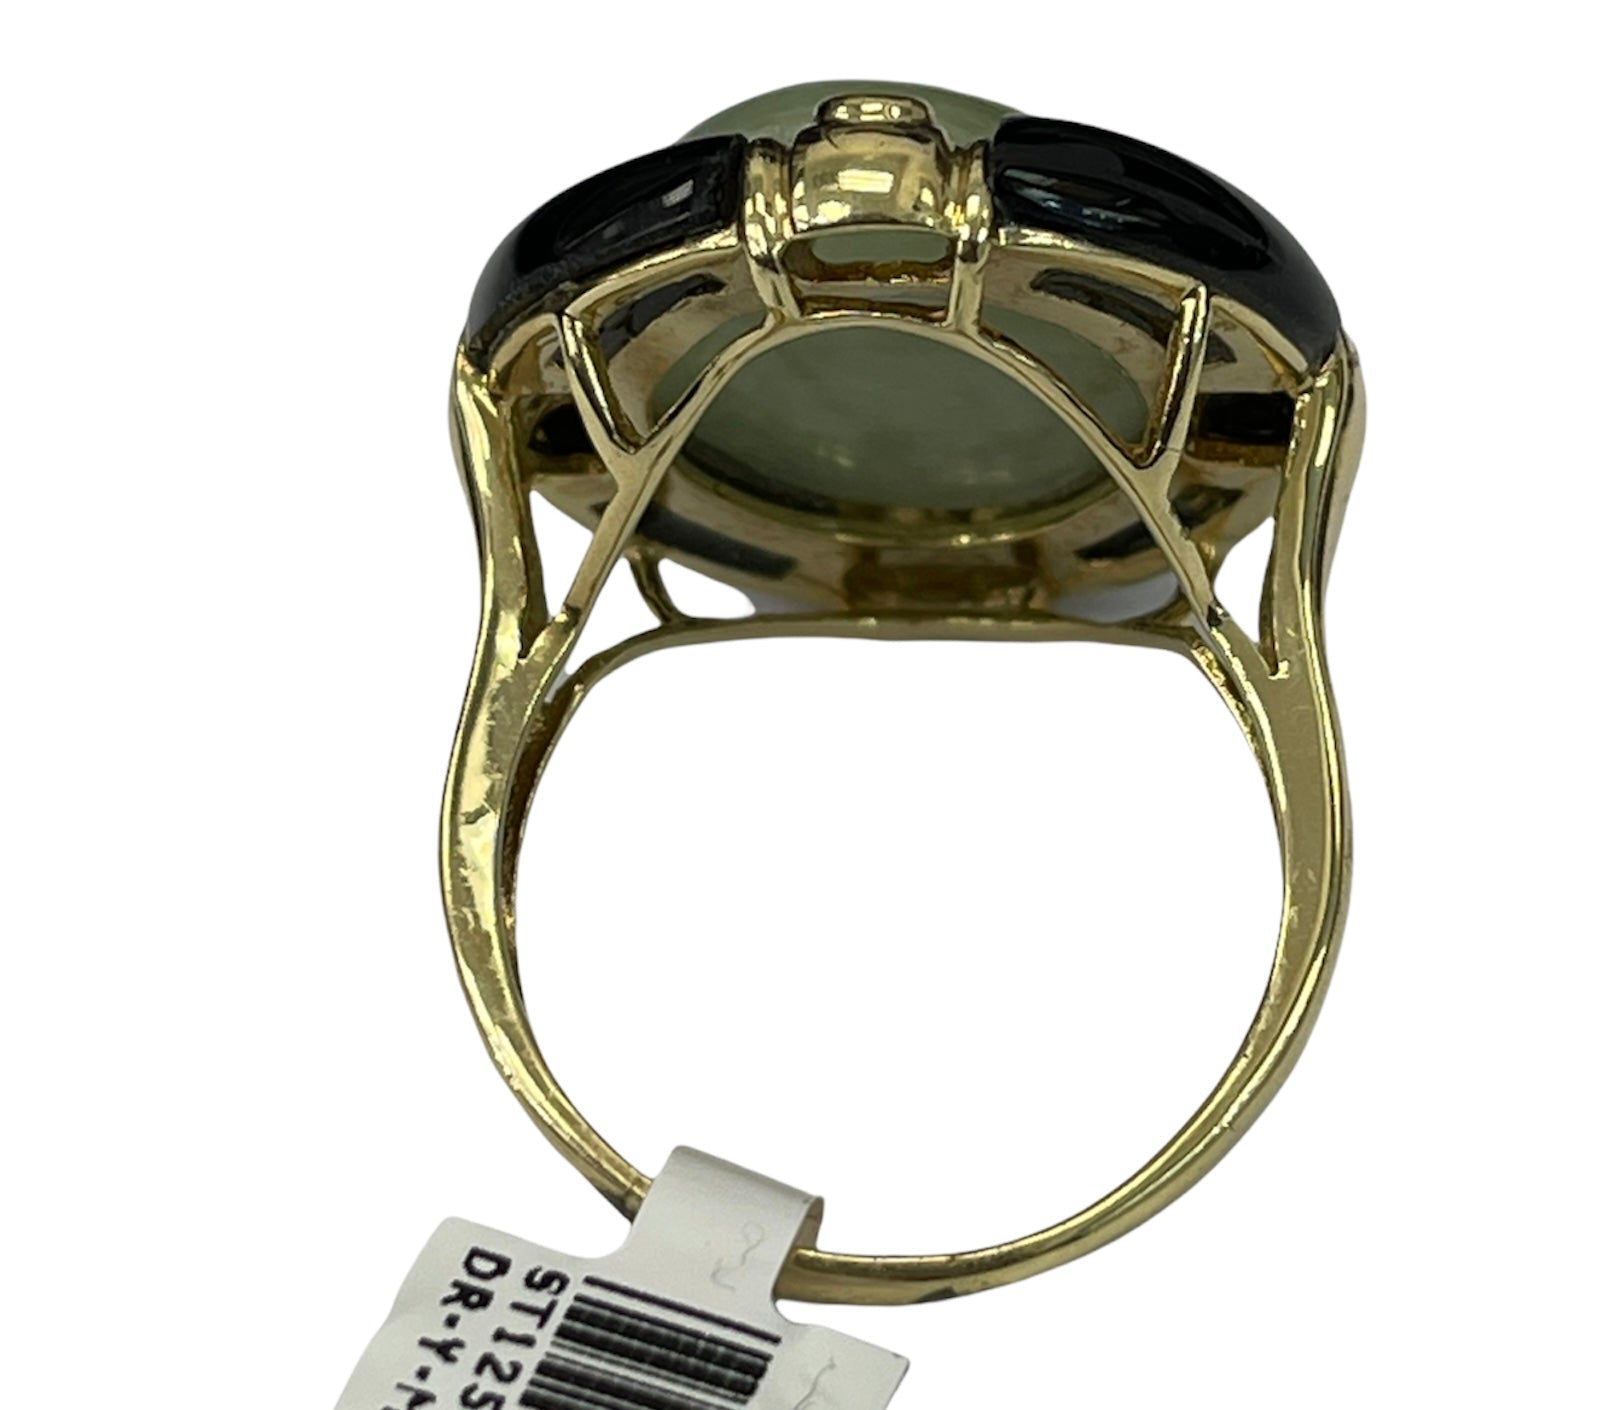 Jade Diamond Ring with Enamel Accents Yellow Gold